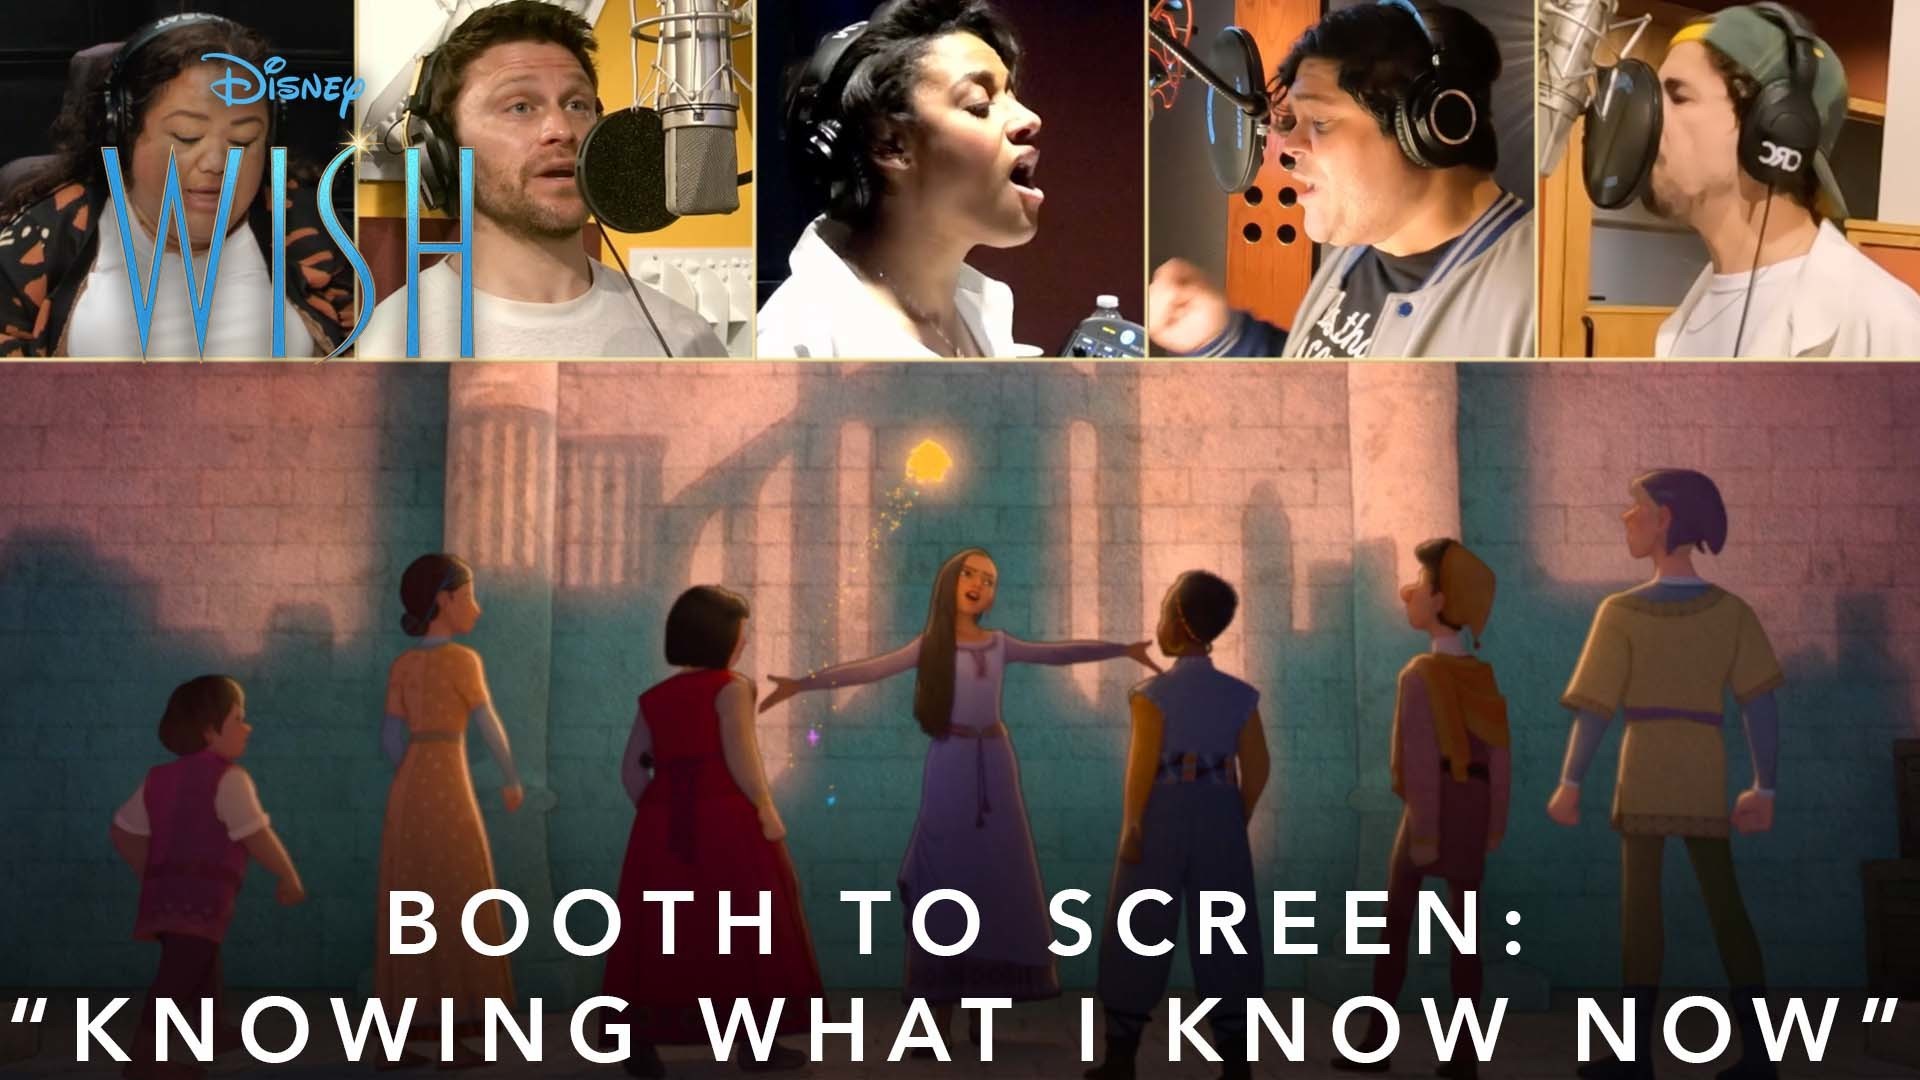 Disney's Wish | Booth-to-Screen: "Knowing What I Know Now"